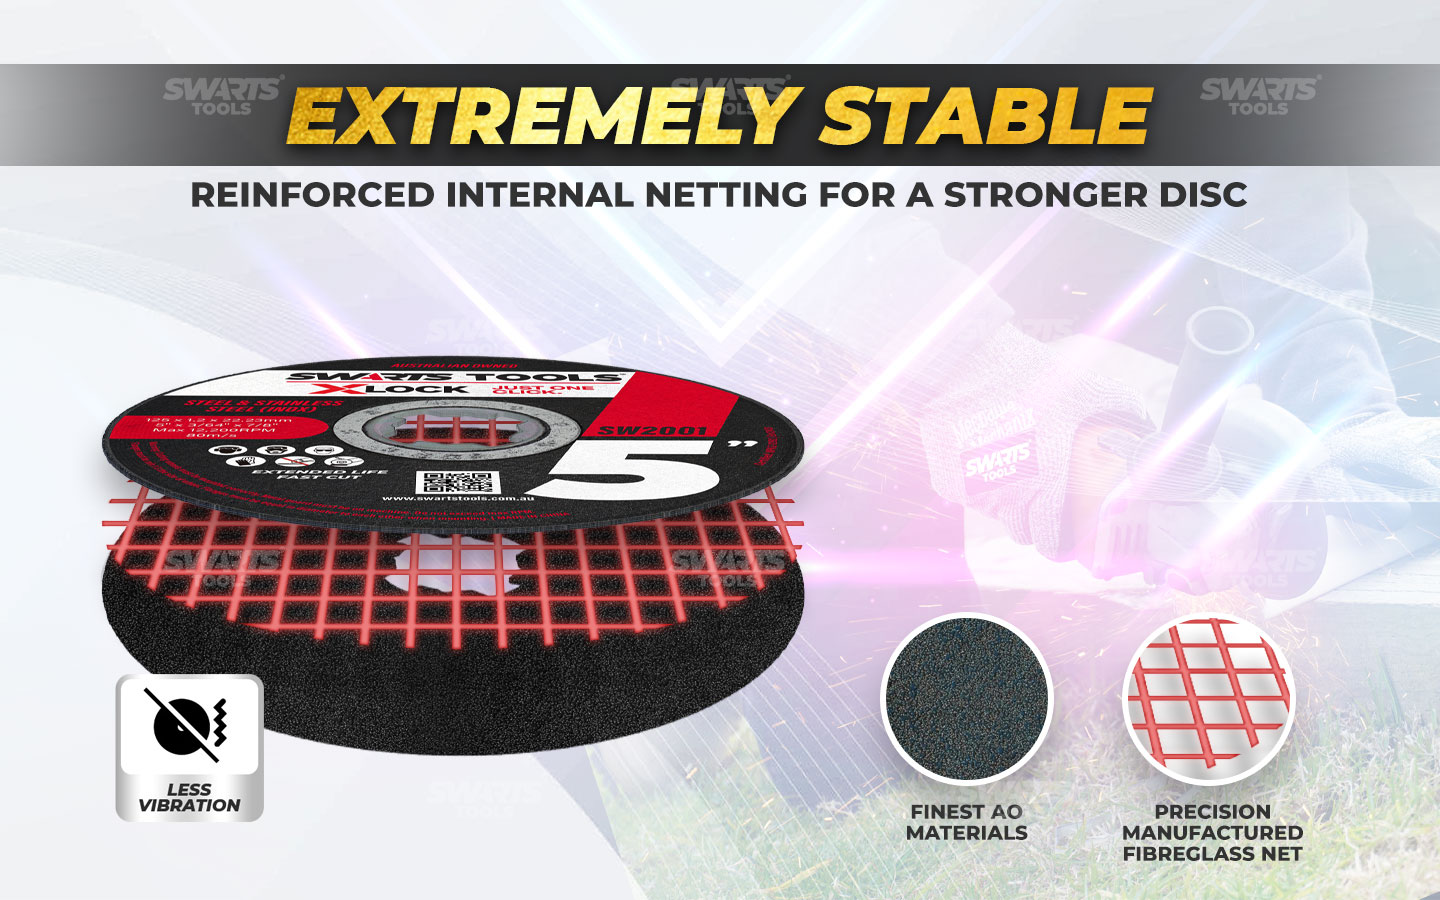 Extremely stable, reinforced internal nettting for a stronger disc